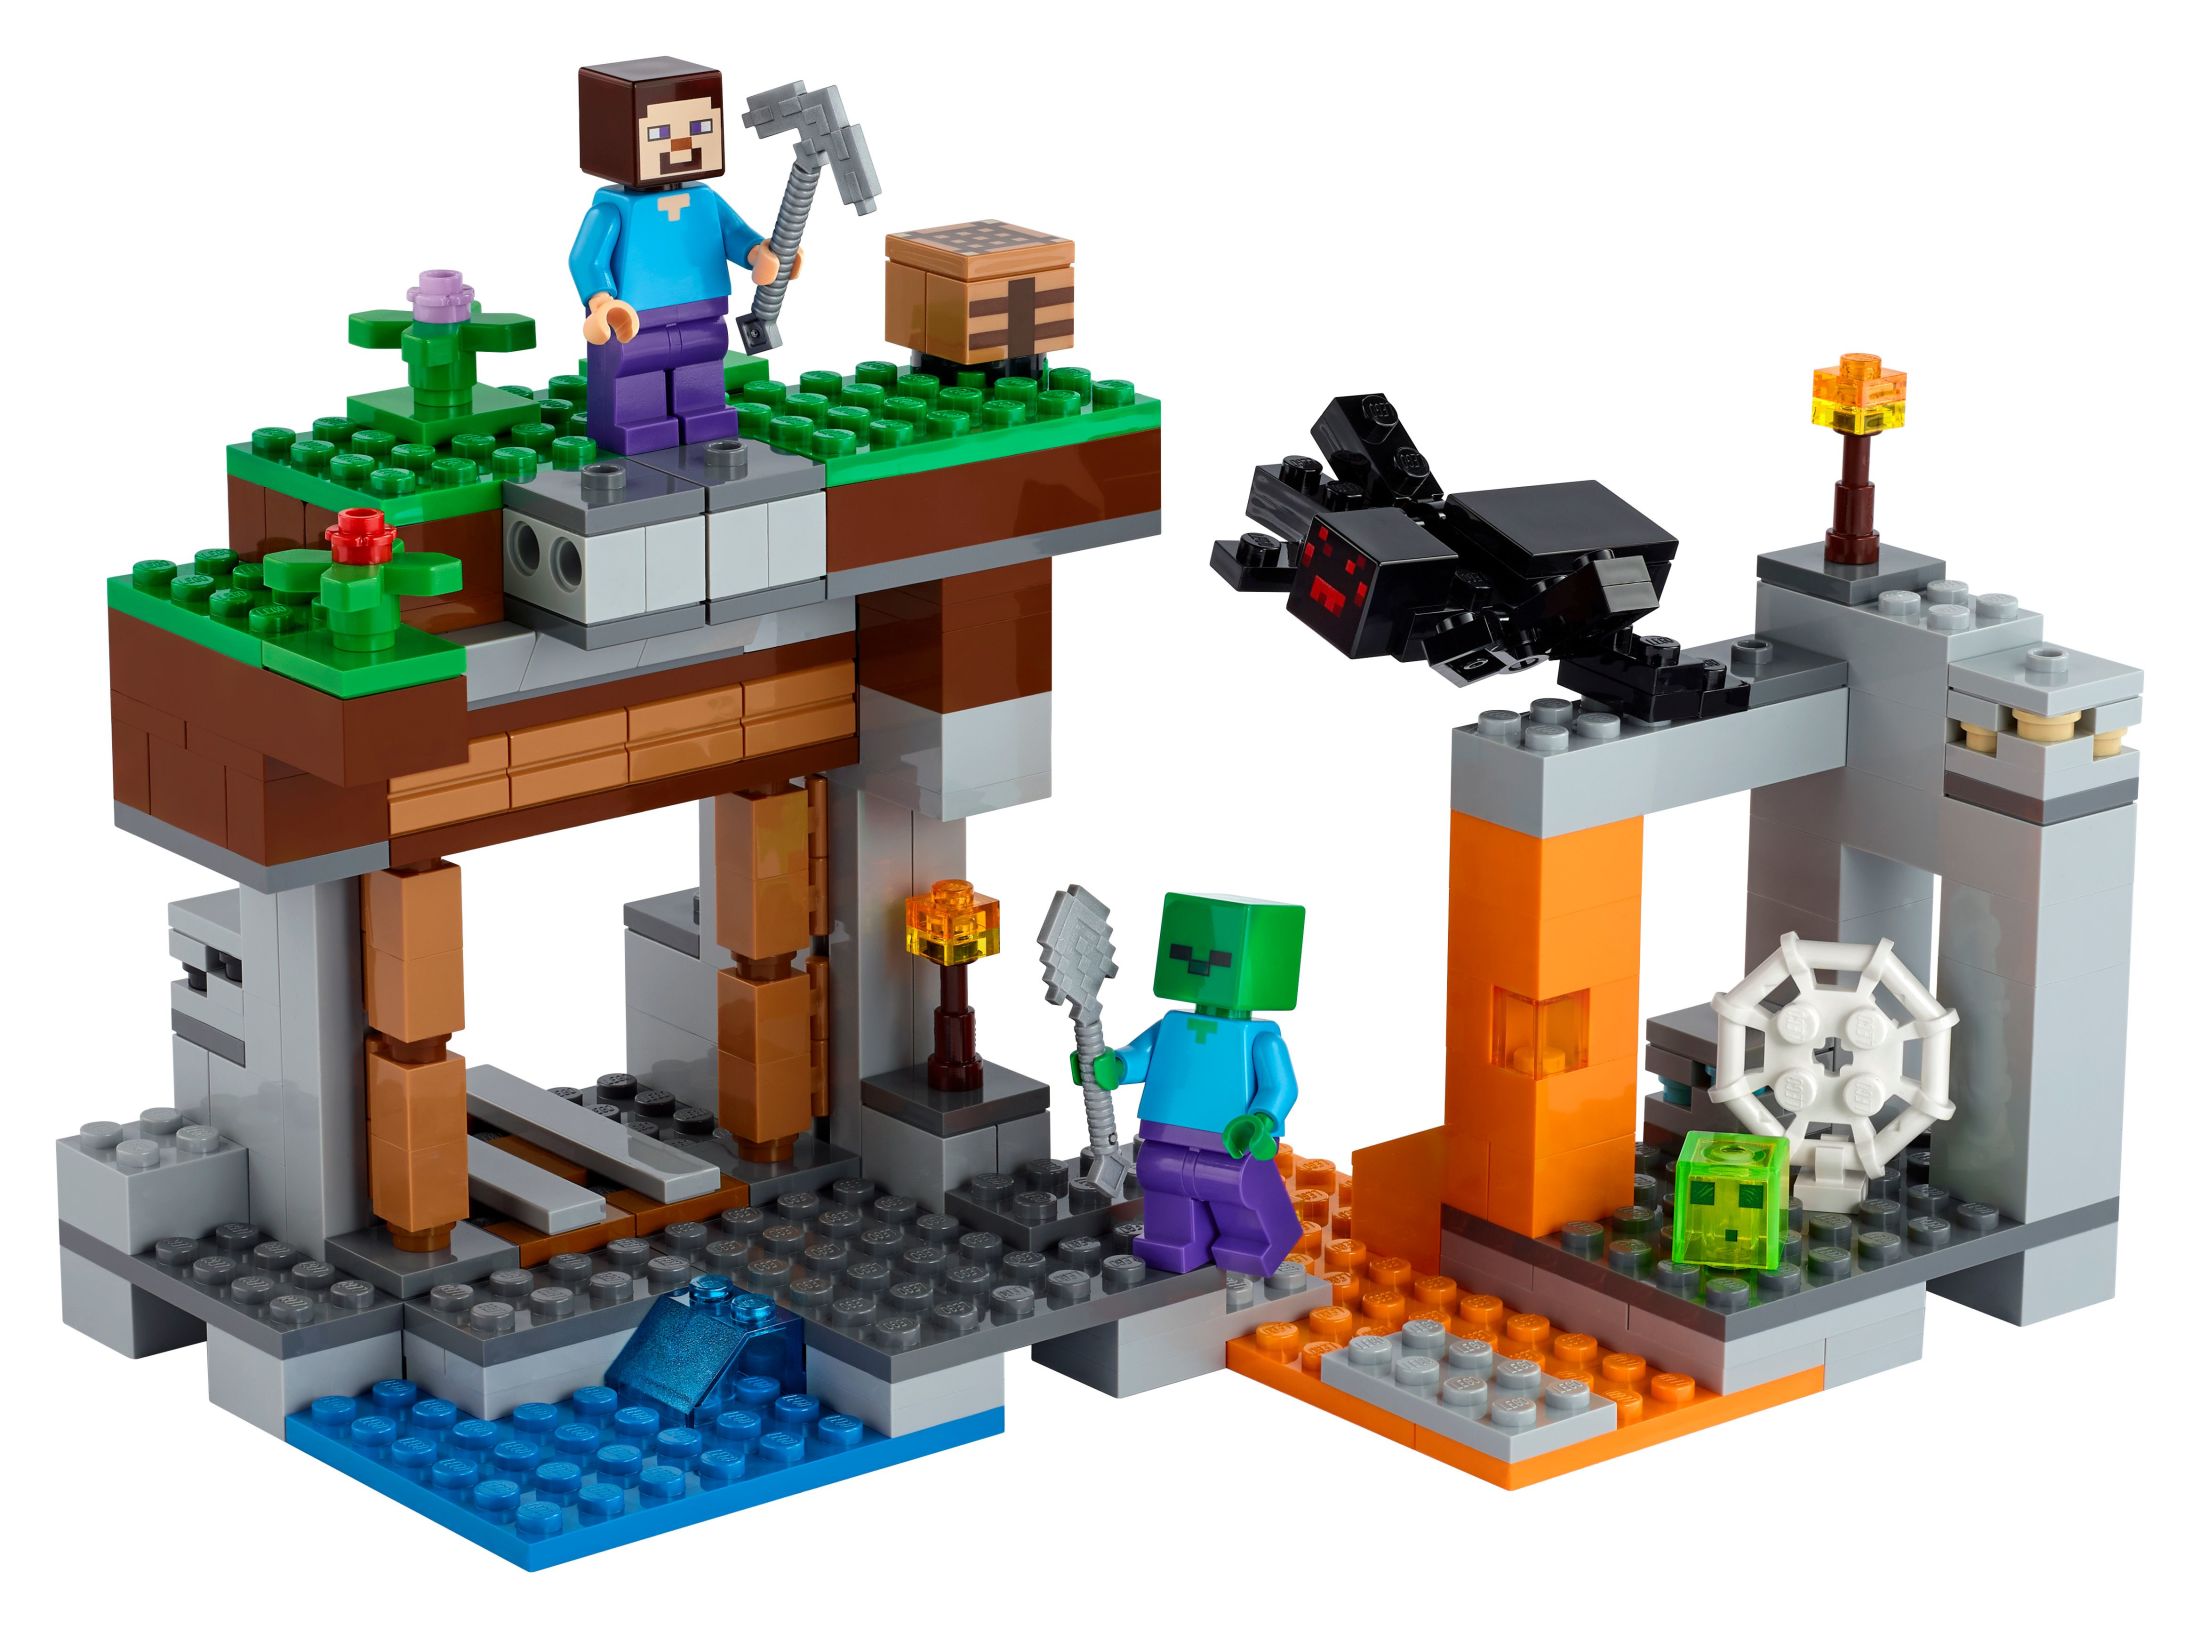 LEGO Minecraft The Abandoned Mine Building Toy, 21166 Zombie Cave with Slime, Steve & Spider Figures, Gift idea for Kids, Boys and Girls Age 7 plus - image 4 of 8